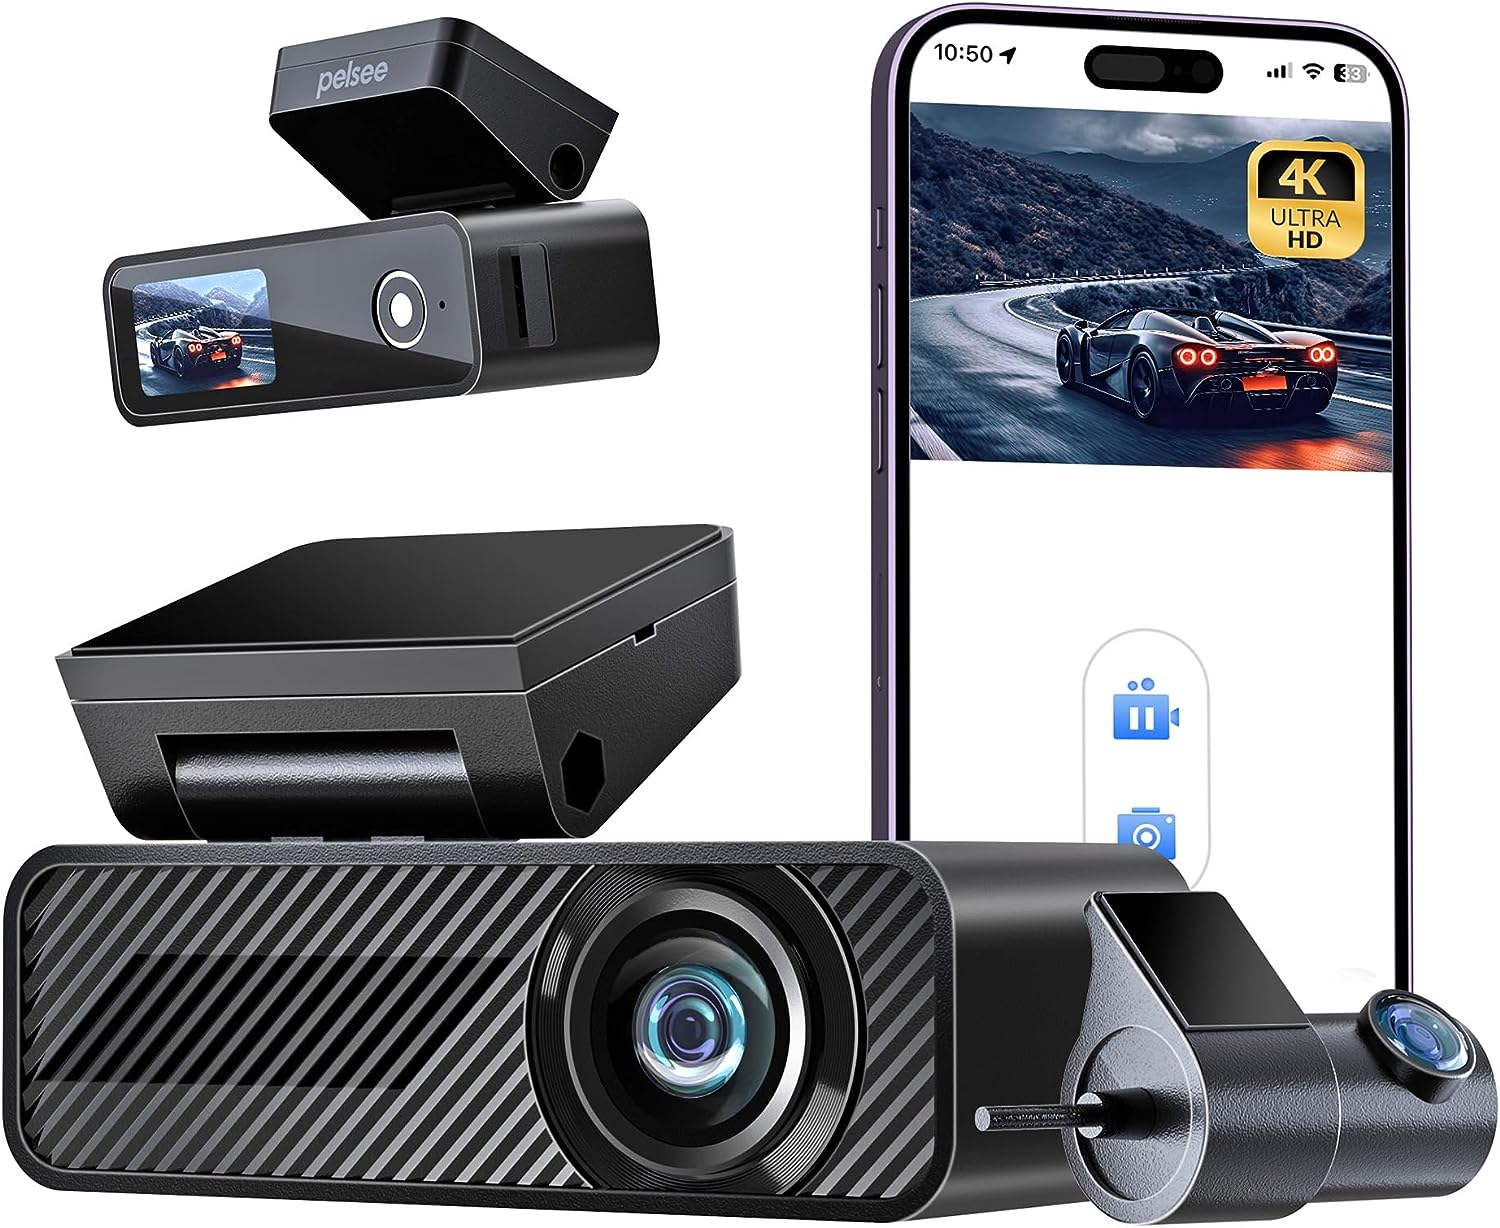 Pelsee Dash Cam Front and Rear, 4K Single Front Dash Camera, 2K/1080P Dual Car Camera for Cars, Built-in Wi-Fi,1.5” IPS Display Mini Dashcam,Night Vision,Voice Control,24H Parking Mode,G-Sensor,P1 Duo